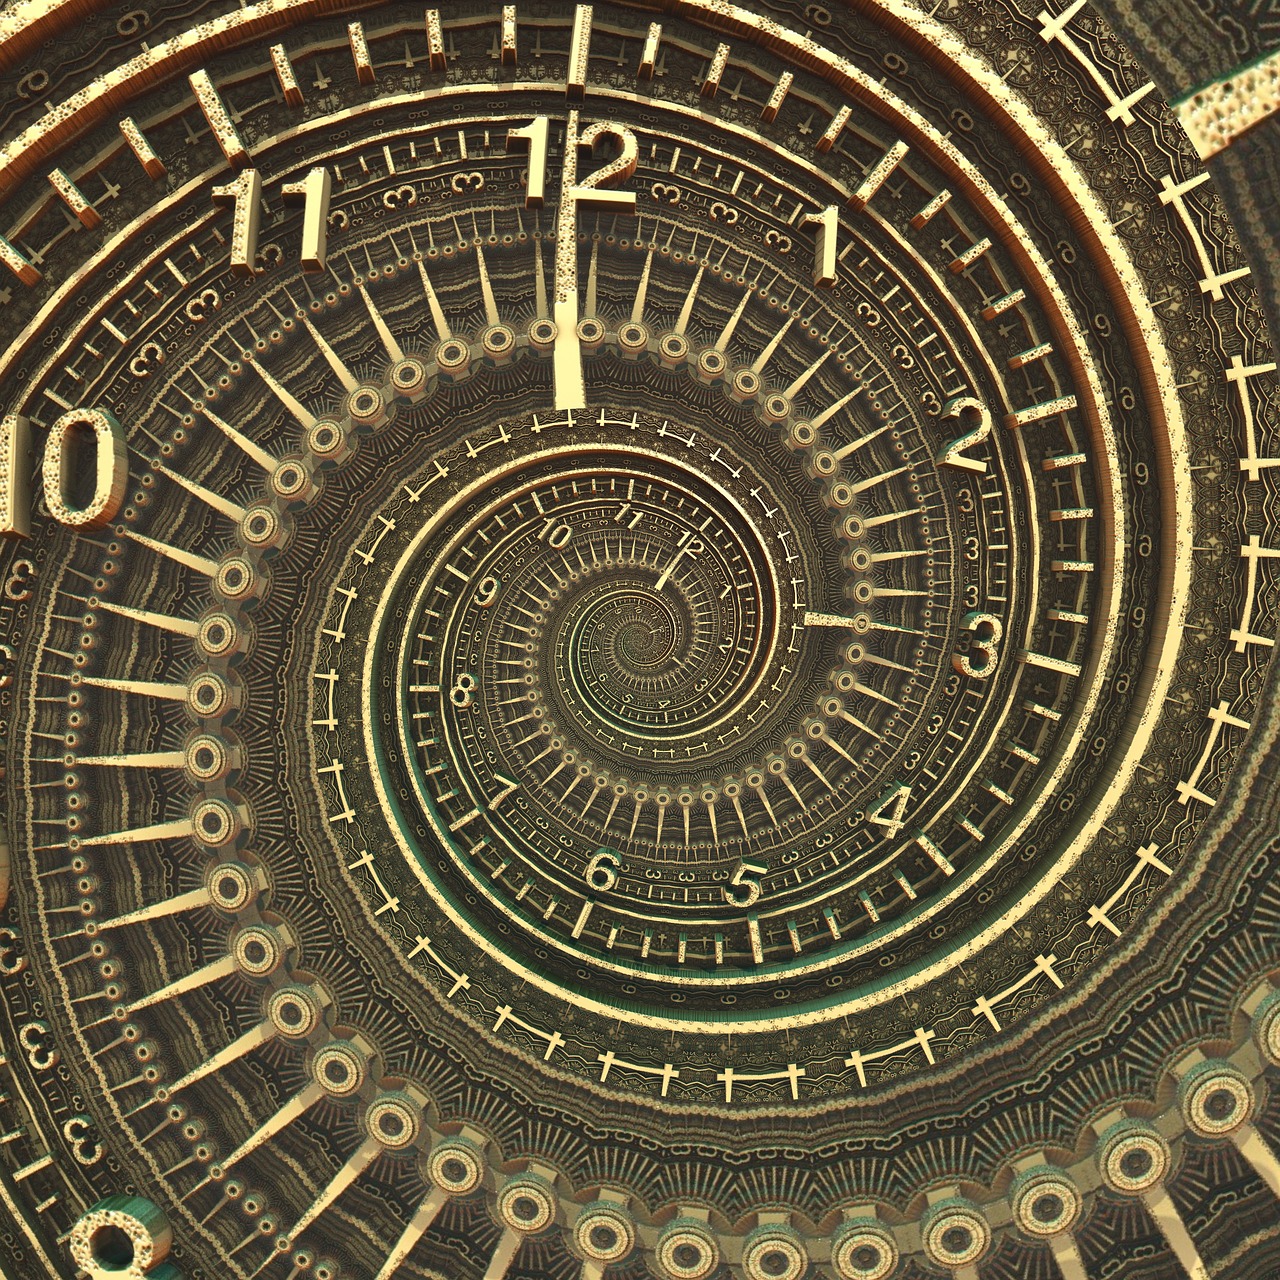 Against a black background, golden numbers and tick marks suggesting a clock, spiral into the center.